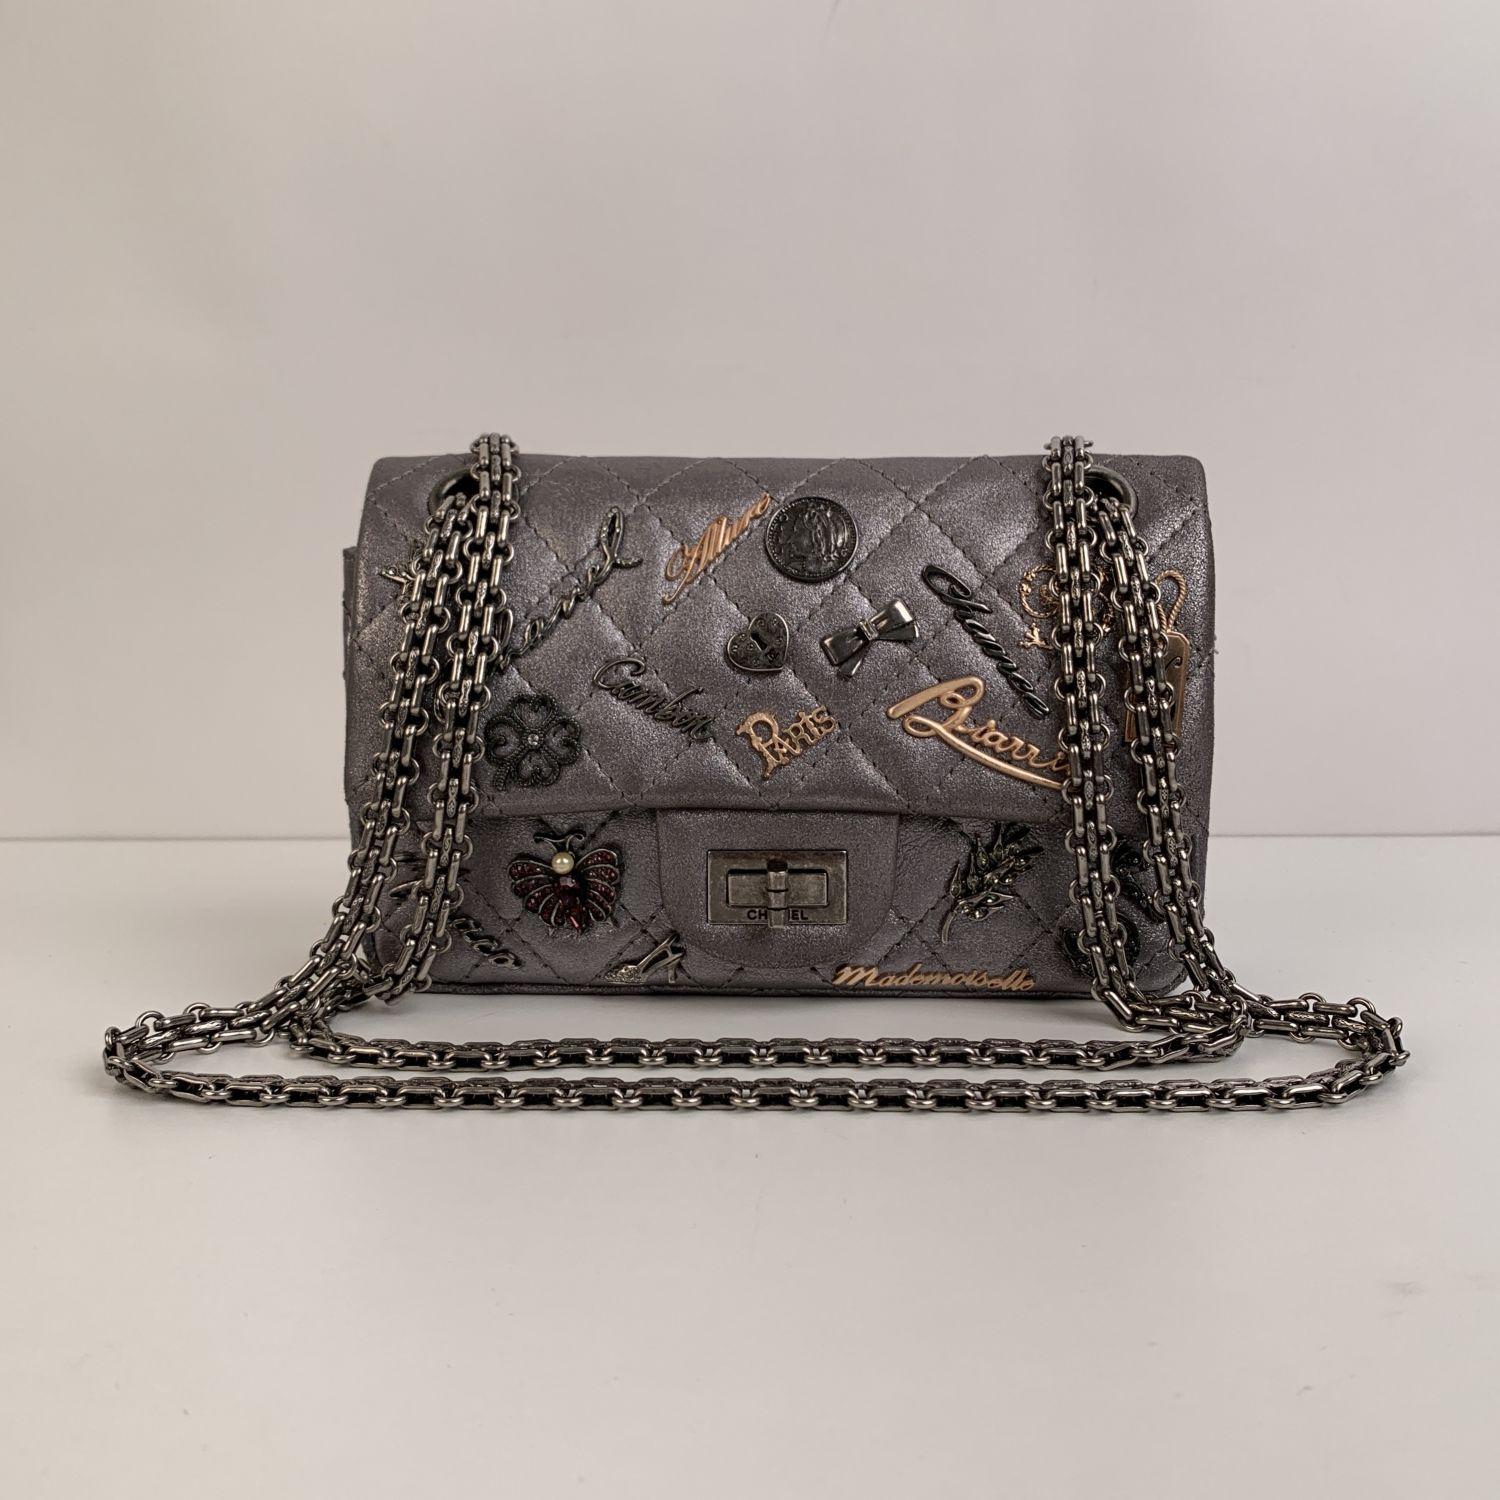 Beautiful Chanel '2.55 Reissue Flap Limited Edition - Lucky Charms' Shoulder Bag. The bag is crafted in silver-tone quilted leather embellished with different Chanel iconic metal charms applications. It features the Mademoiselle turnlock closure and